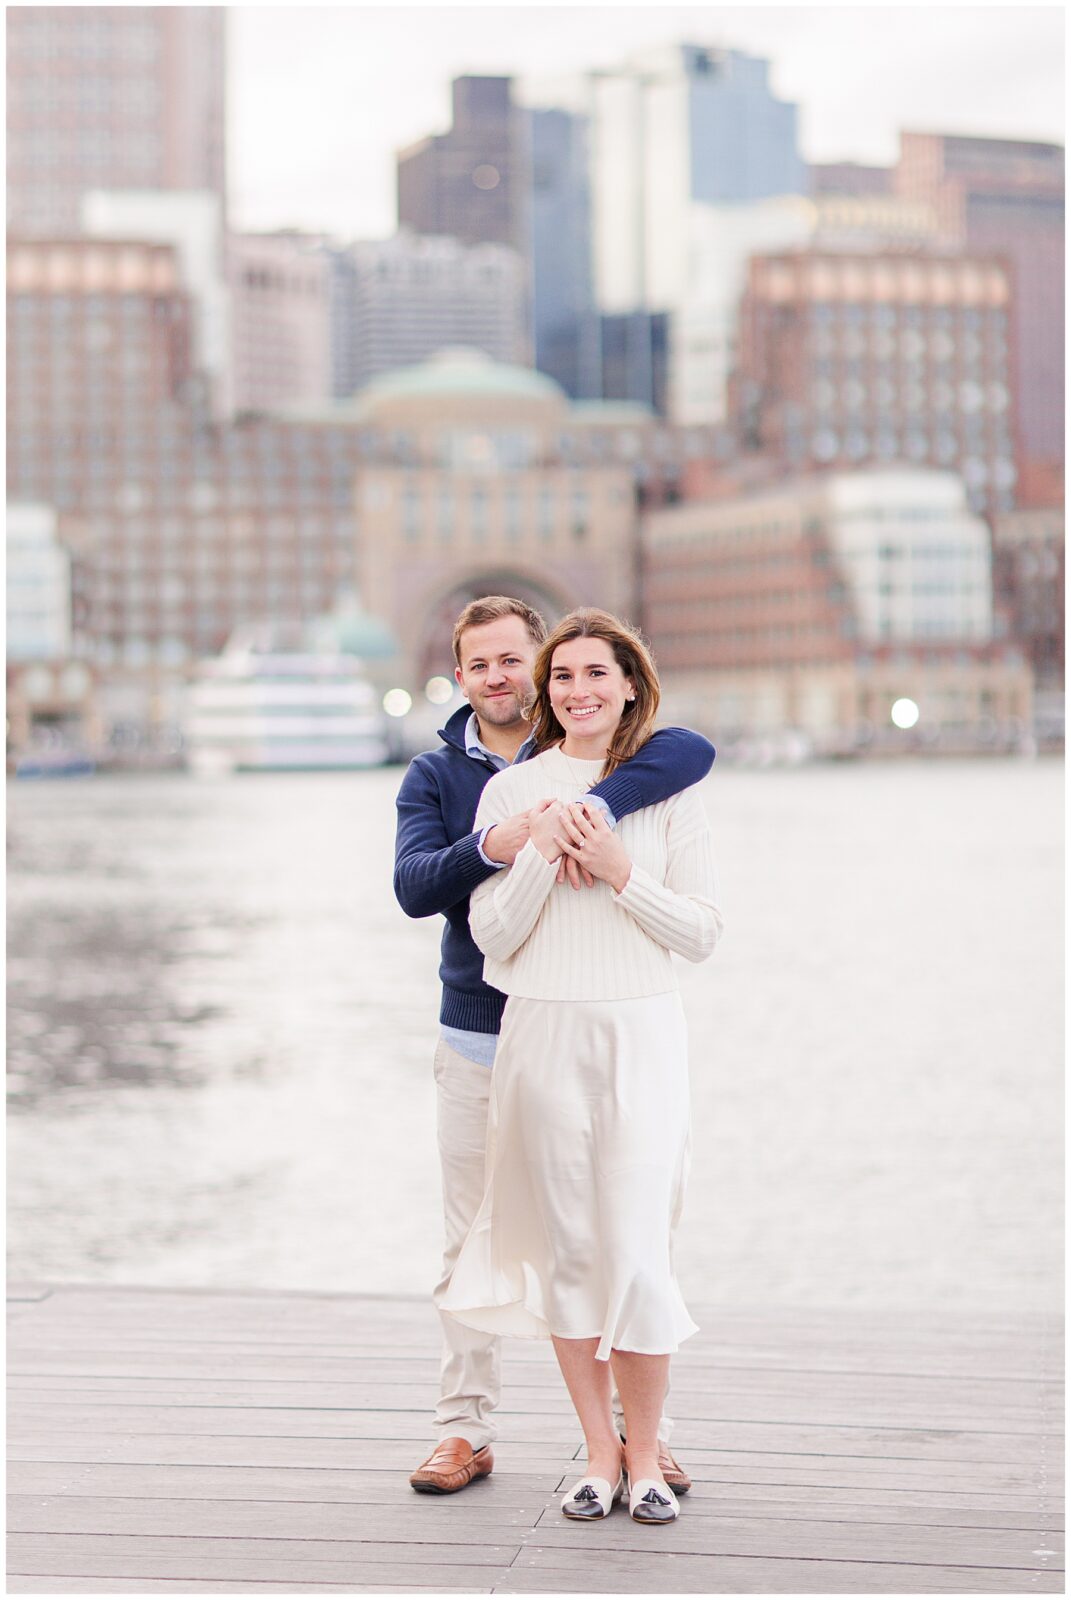 Man holding onto woman during Boston Seaport engagement session.